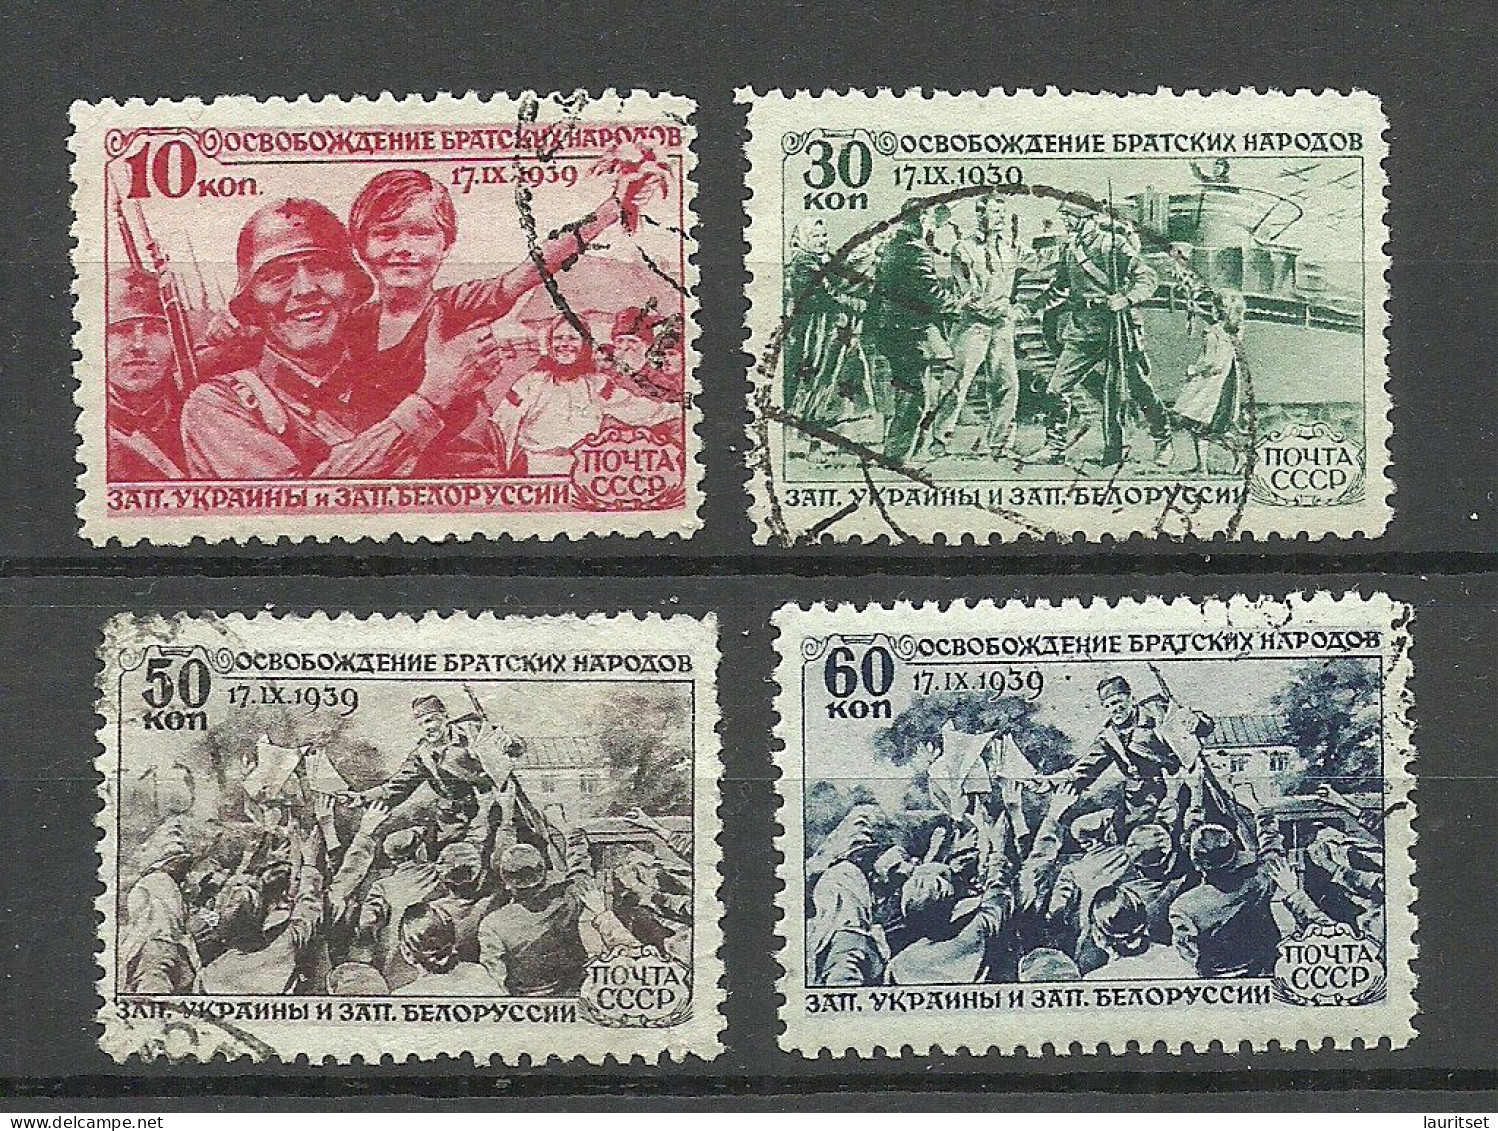 RUSSLAND RUSSIA 1940 Michel 736 - 739 O - Used Stamps